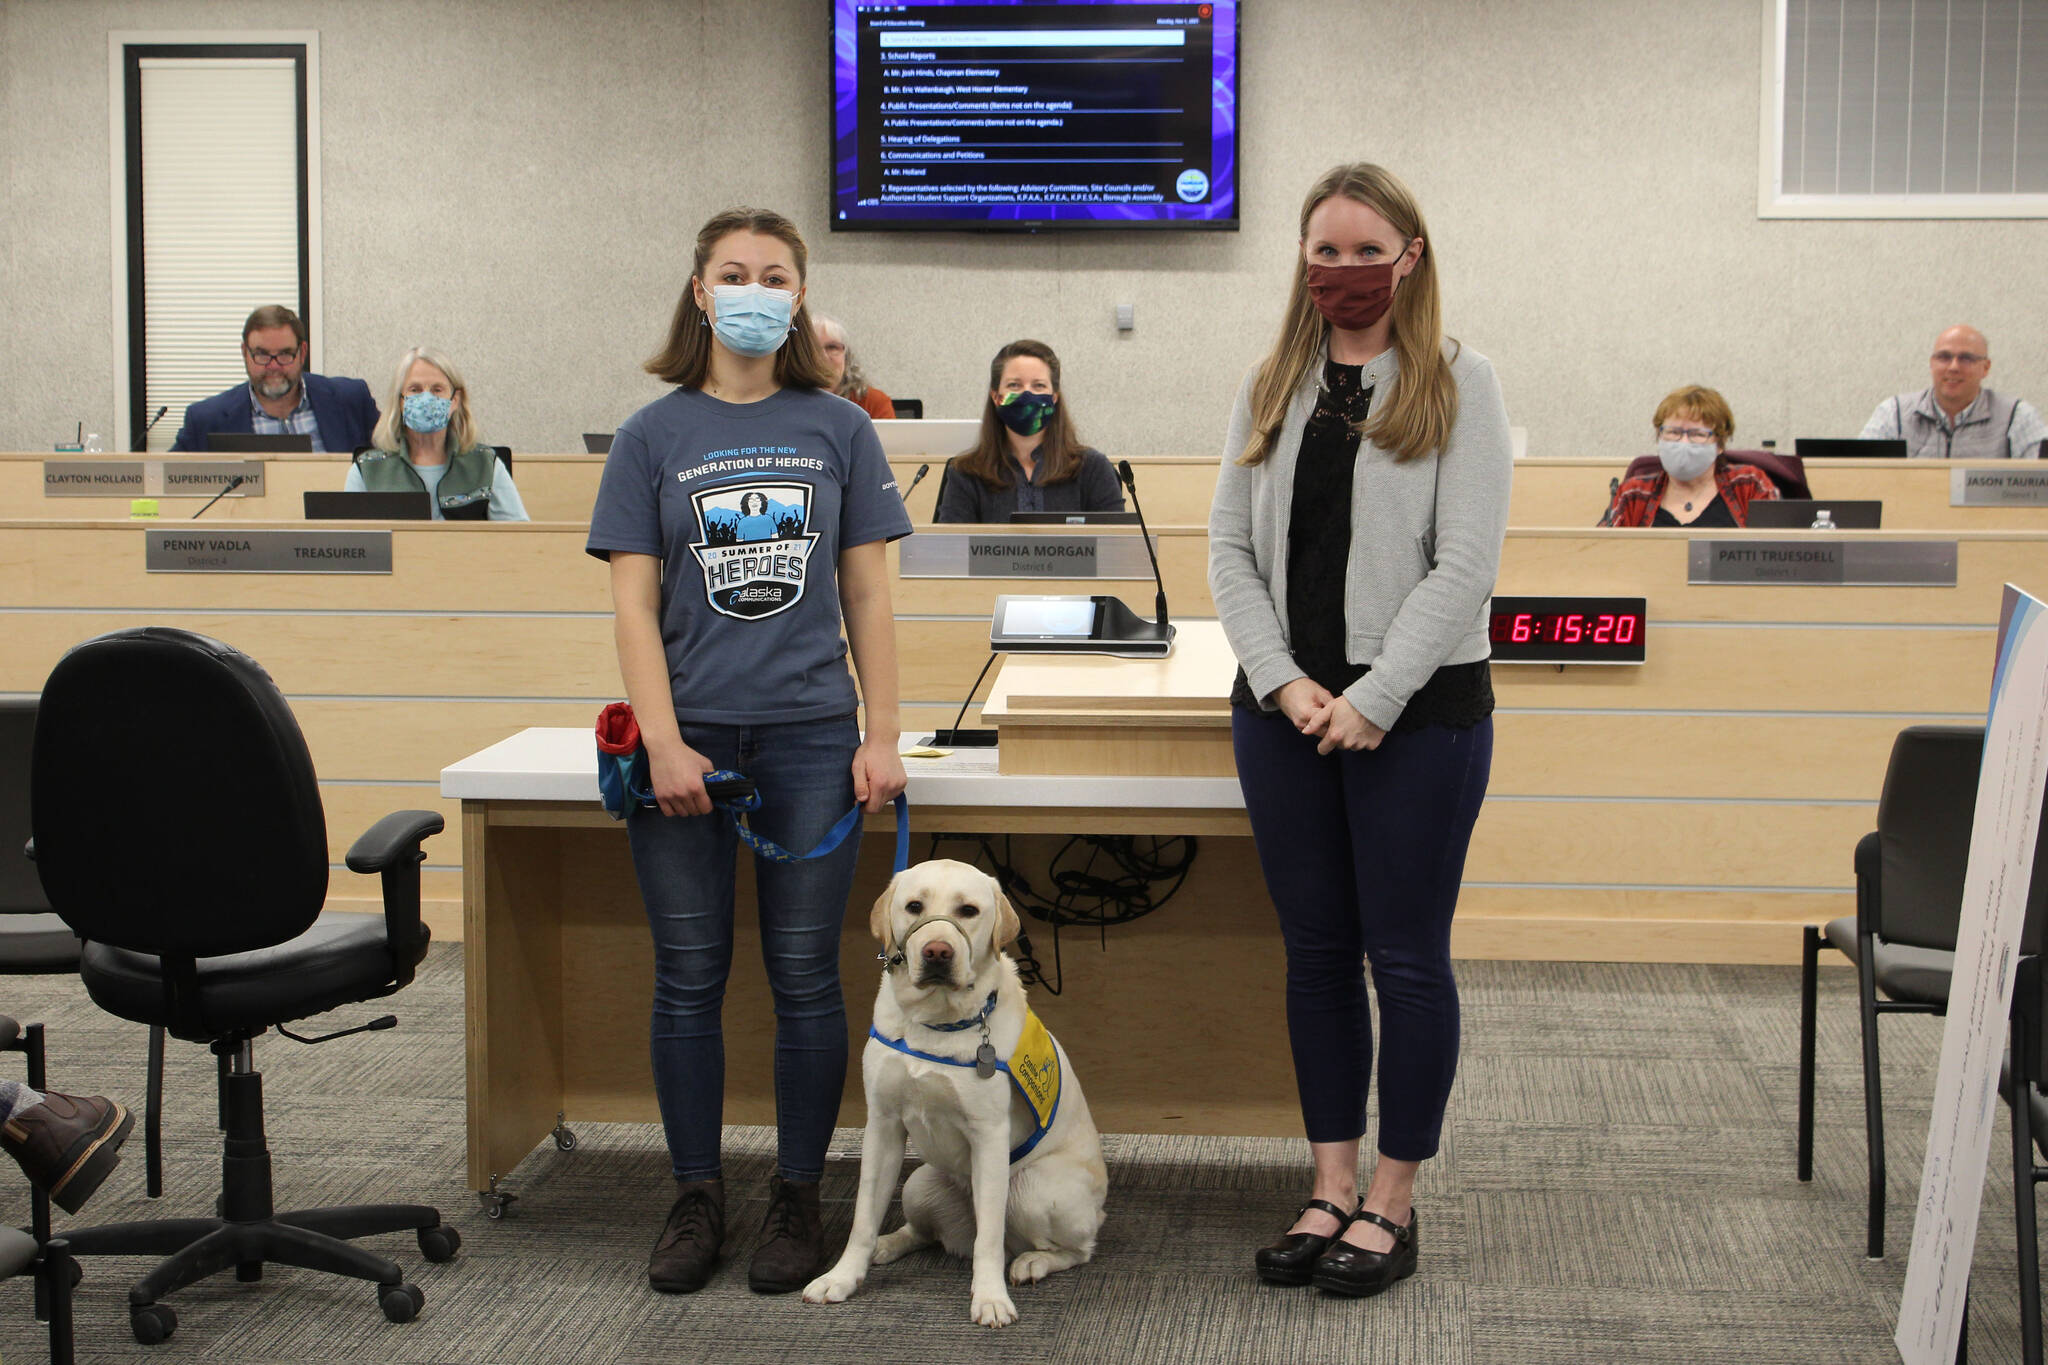 River City Academy junior Selena Payment (left) and Heather Marron stand with Payment’s service dog-in-training, Boots, ahead of the Kenai Peninsula Borough School District Board of Education on Monday in Soldotna. Payment, 16, was named a 2021 youth hero through Alaska Communications’ Summer of Heroes program and was honored by the board Monday. (Ashlyn O’Hara/Peninsula Clarion)
Selena Payment (left) and Heather Marron stand with Payment’s service dog-in-training, Boots, before the Kenai Peninsula Borough School District Board of Education on Monday, Nov. 1, 2021 in Soldotna, Alaska. Payment was named a 2021 youth hero through Alaska Communications’ Summer of Heroes program and was honored by the board Monday. (Ashlyn O’Hara/Peninsula Clarion)